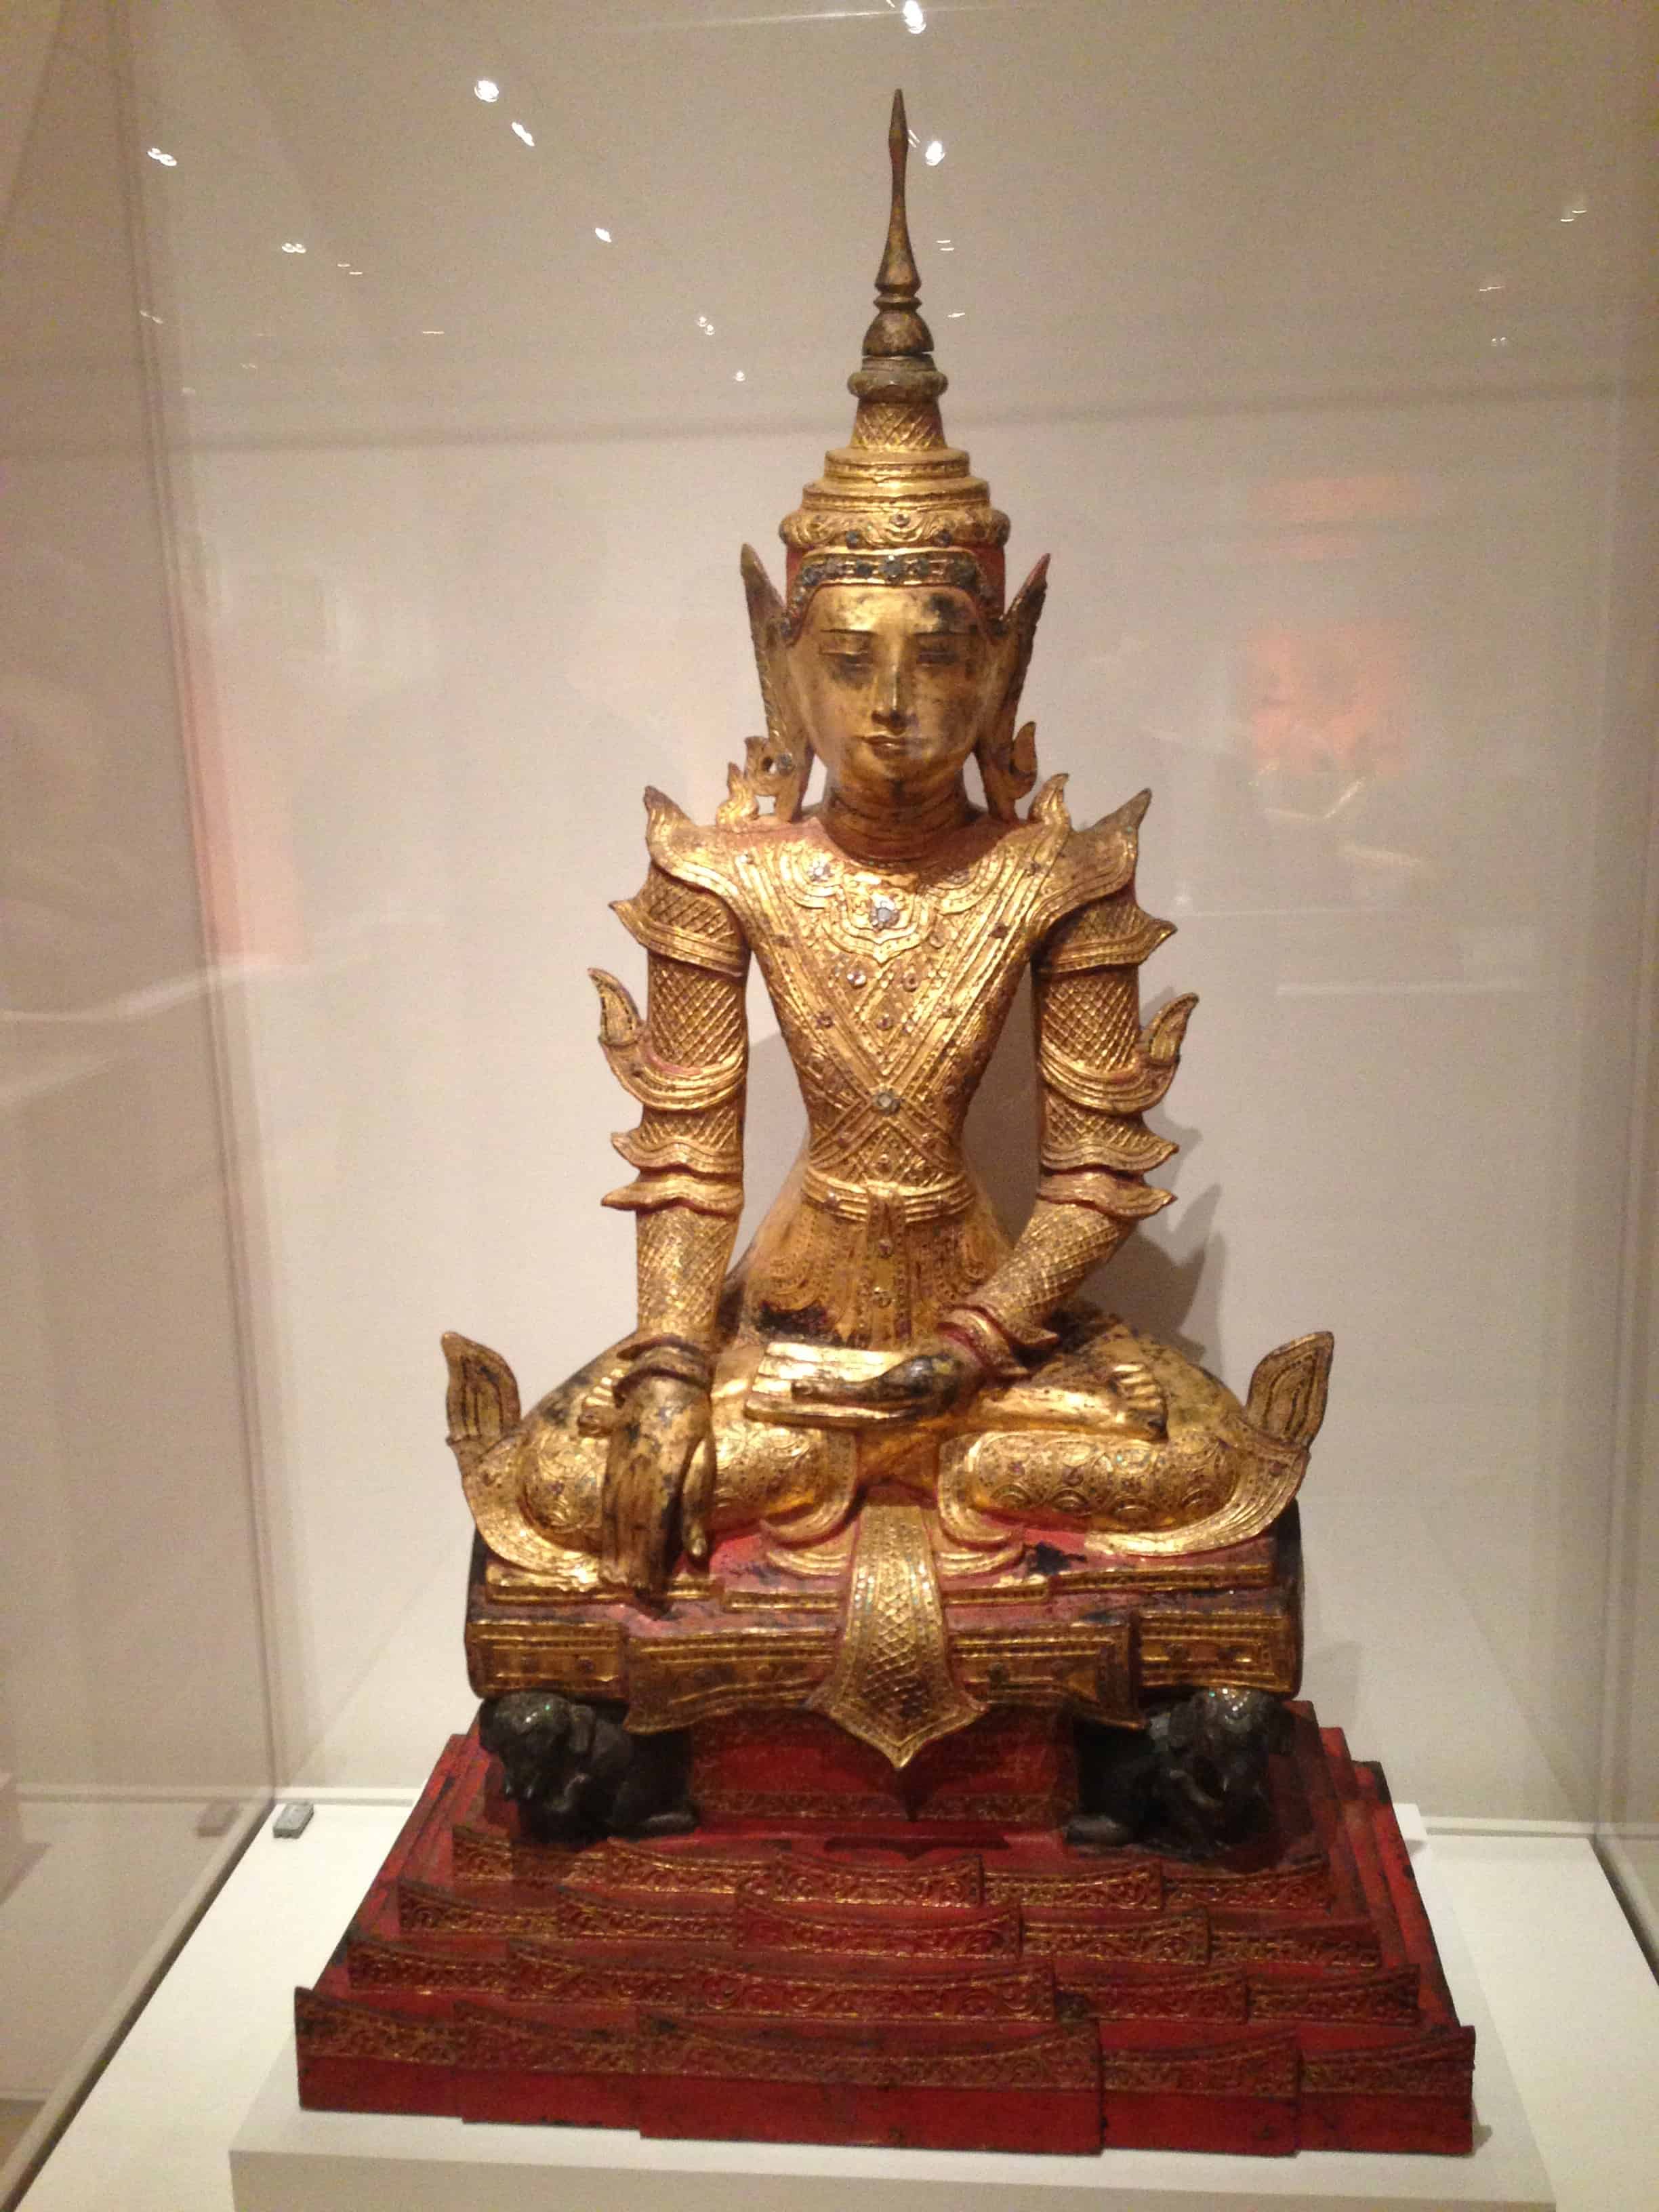 Crowned and Bejewelled Buddha Seated on an Elephant Throne (Late 19th Century) at the Art Institute of Chicago